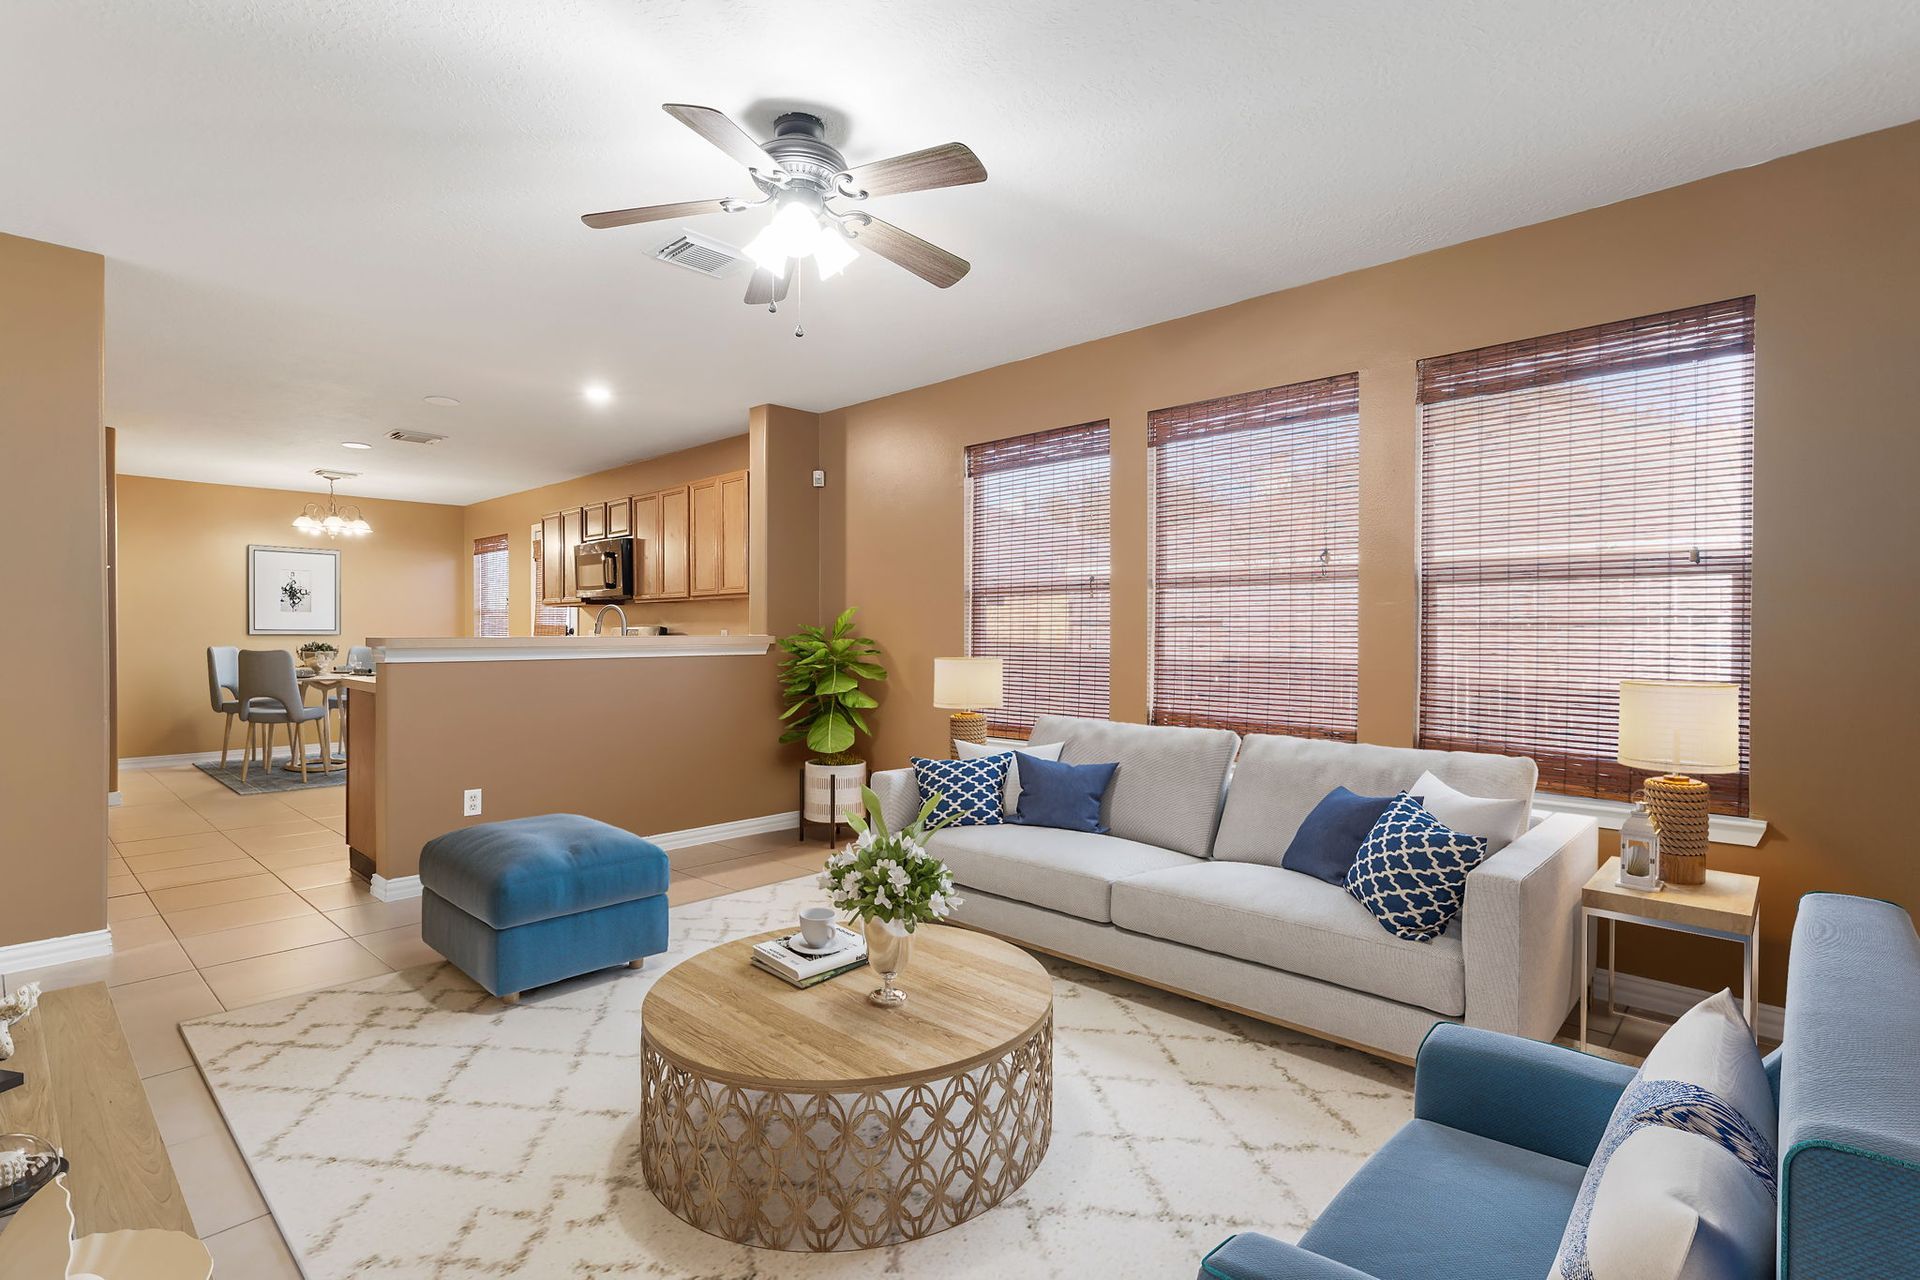 A beautifully designed living room in Katy Texas